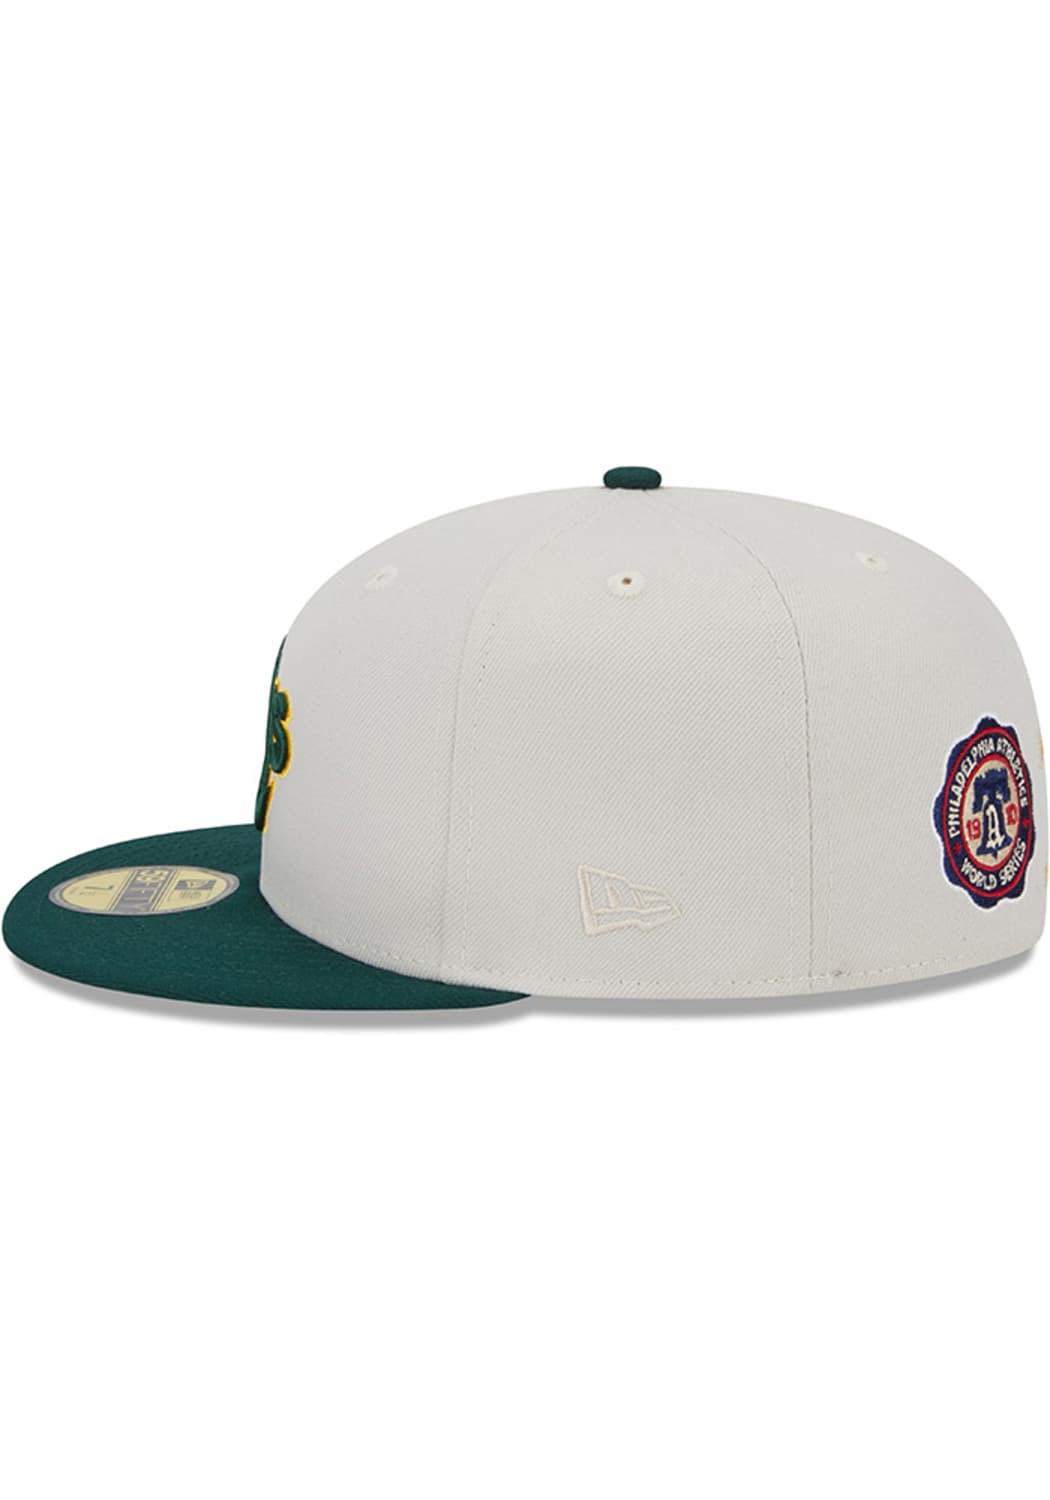 New Era MLB Oakland Athletics Men's White World Class 59Fifty Fitted Hat